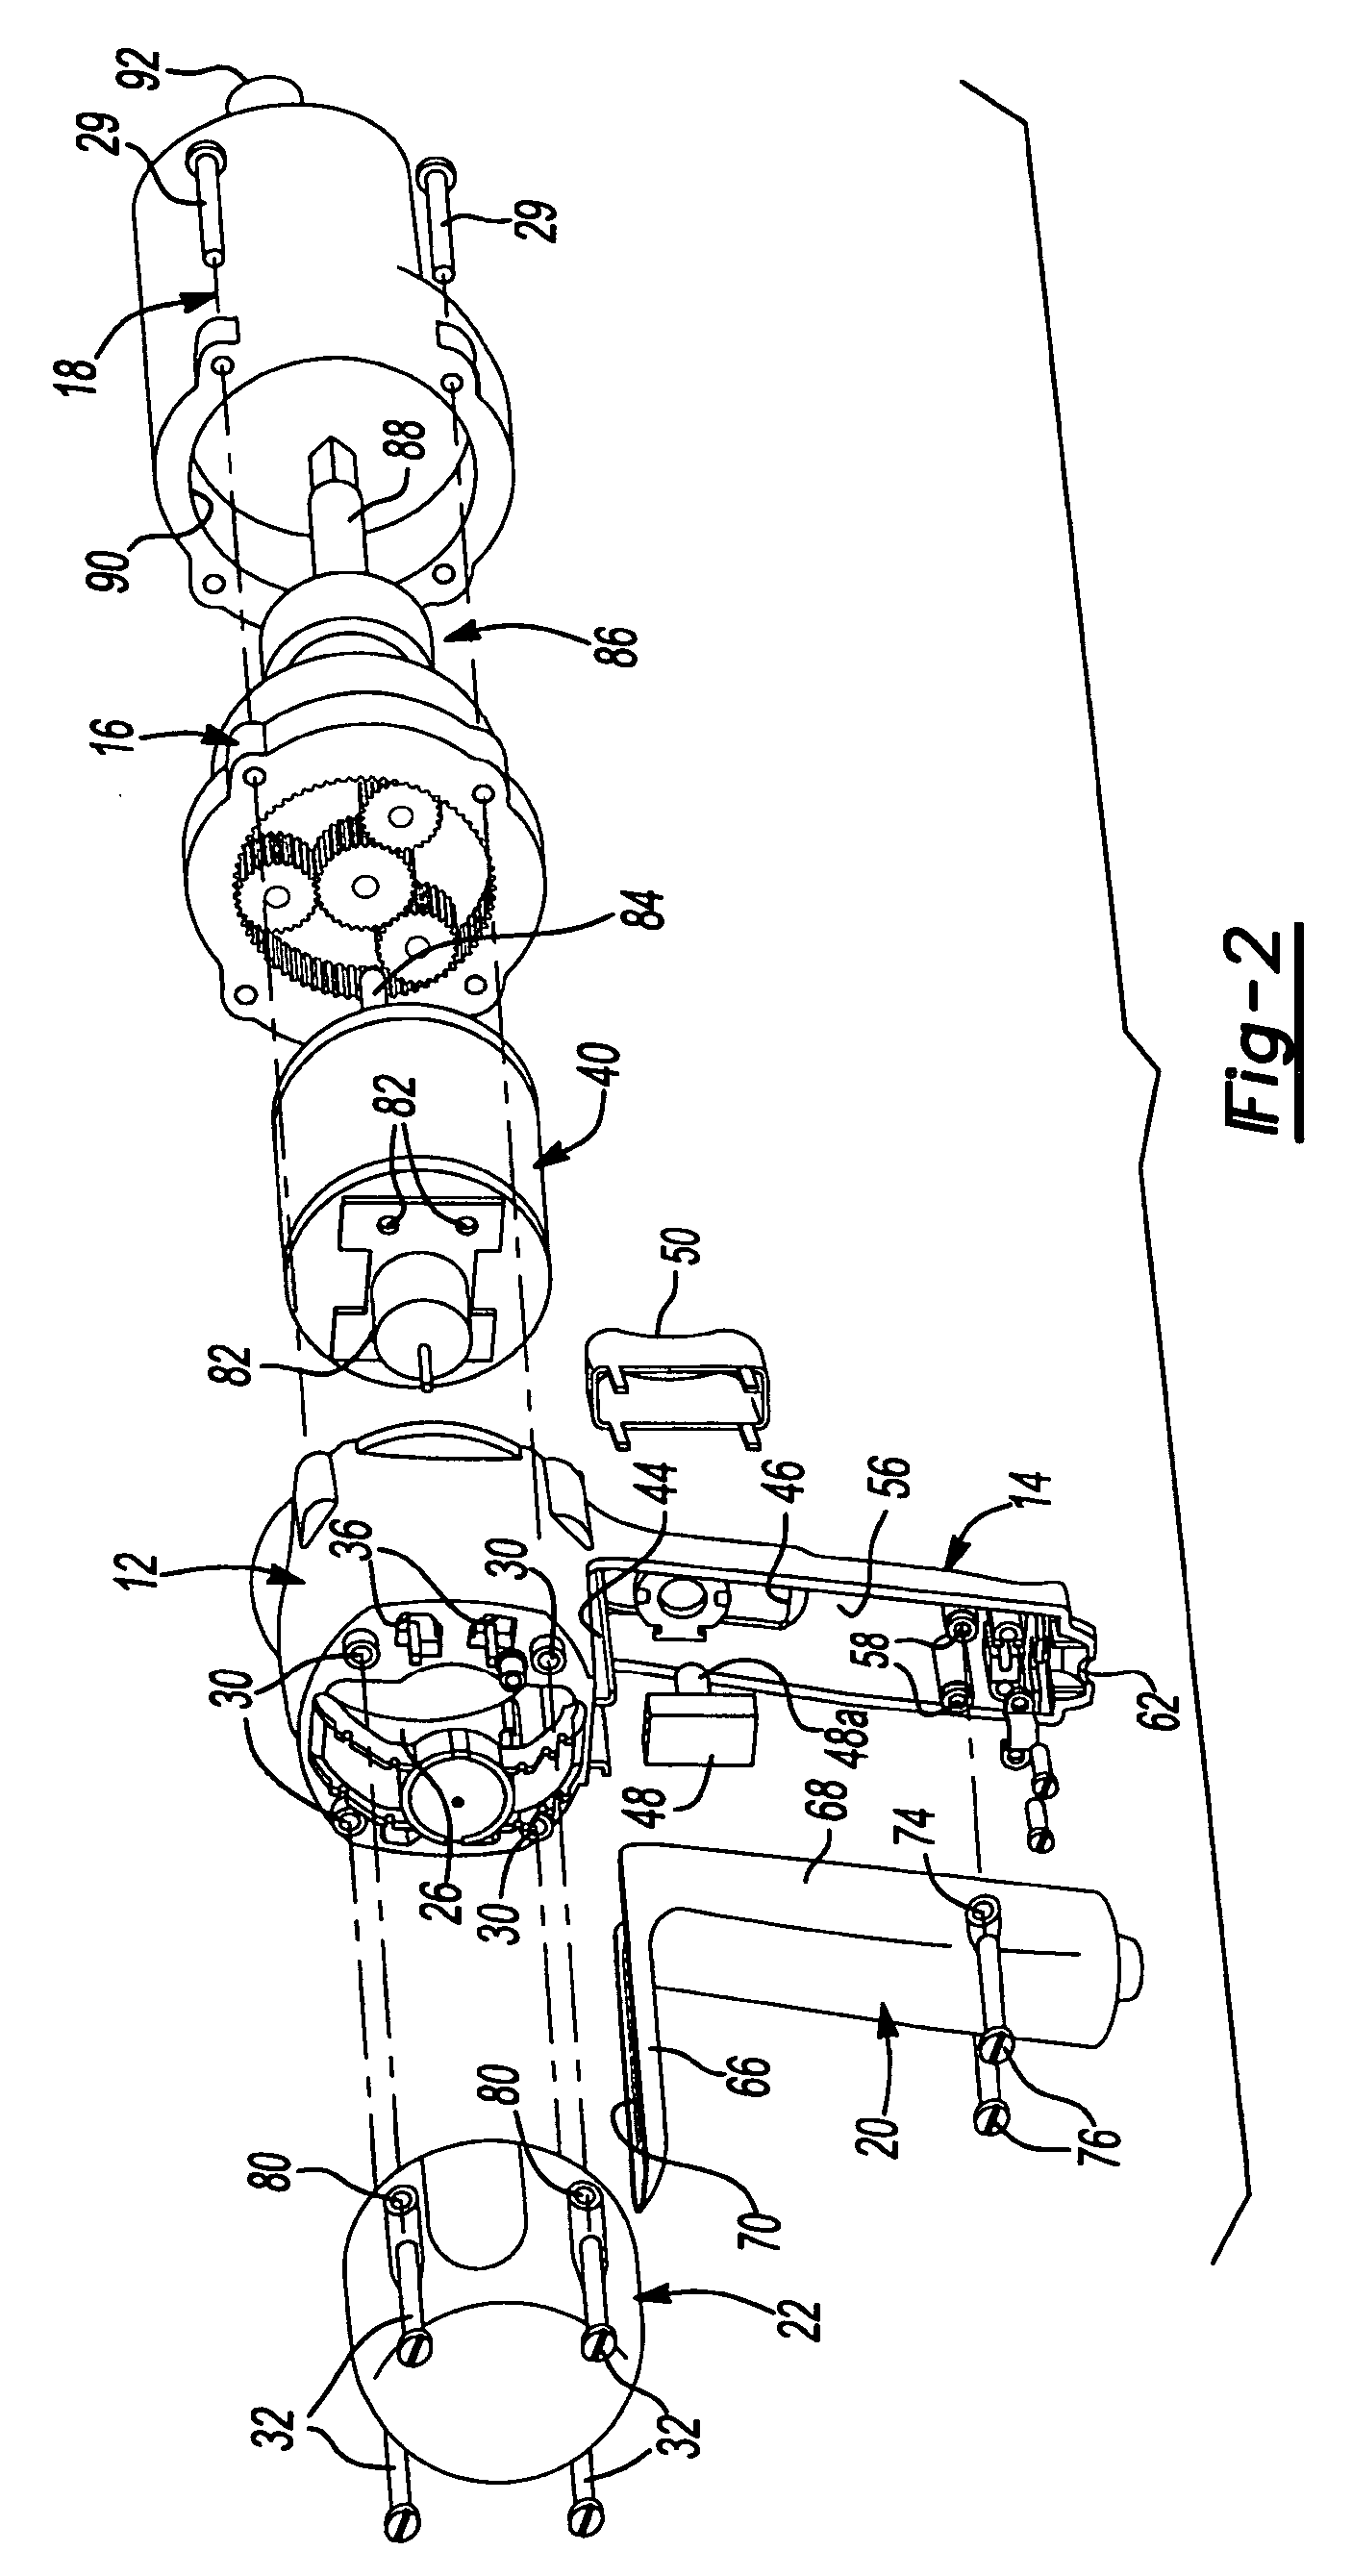 Motor housing and assembly process for impact wrench